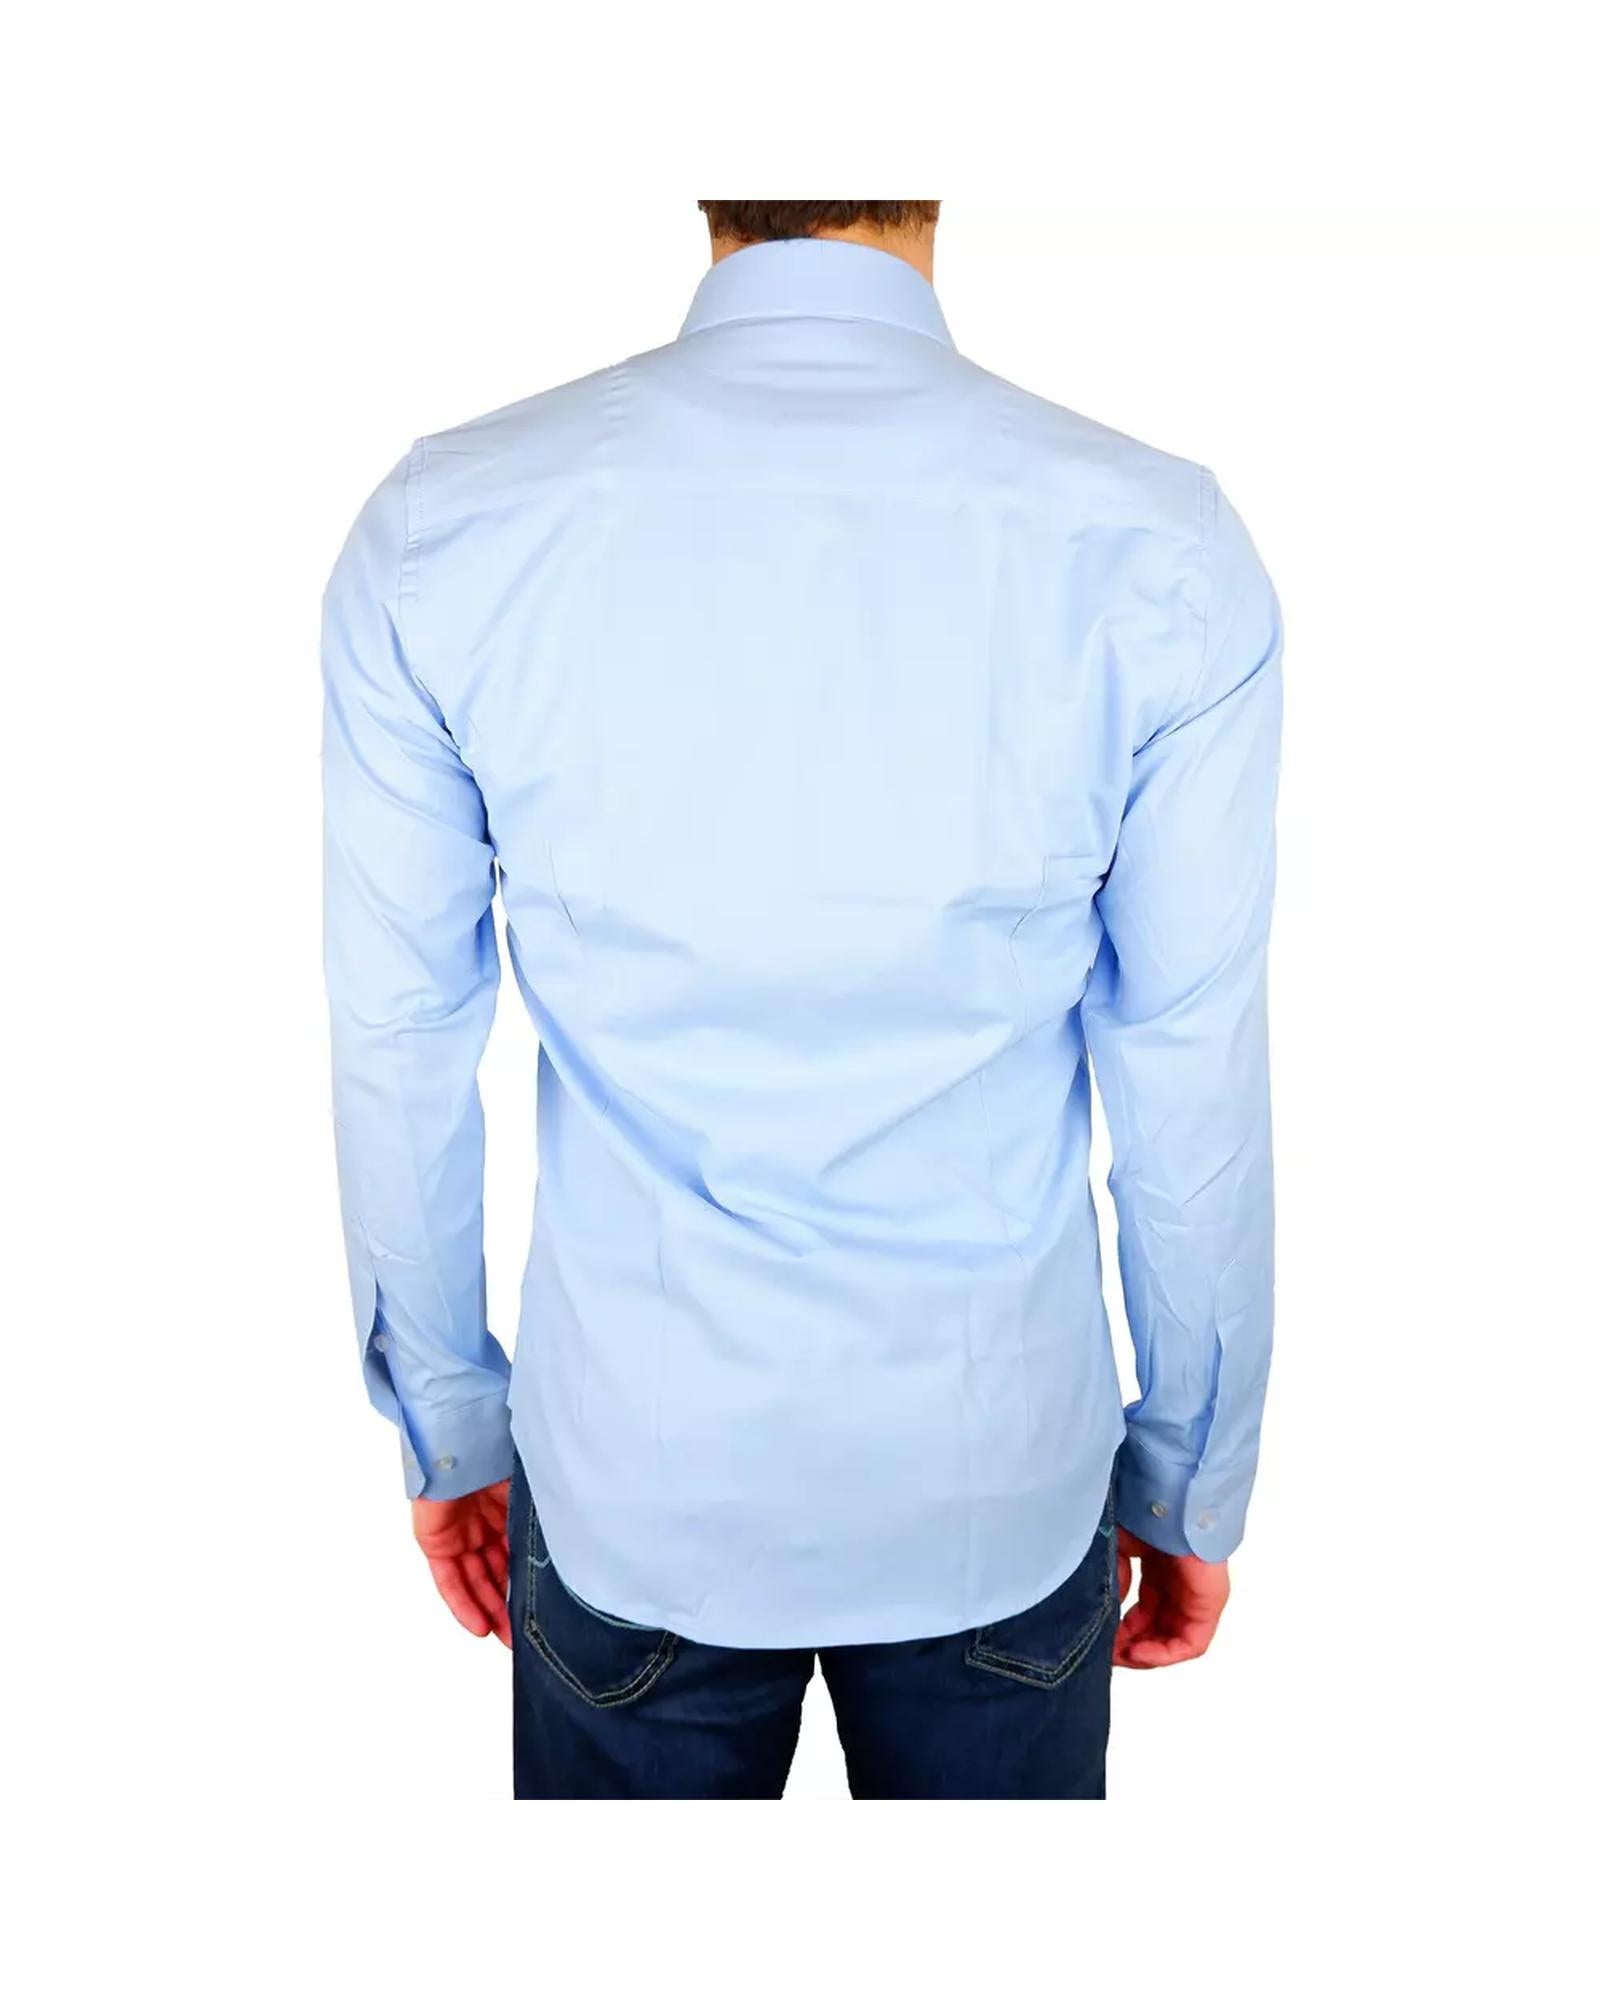 Milano Solid Color Shirt in Light Blue - Soft Satin Fabric - 100% Cotton 45 IT Men